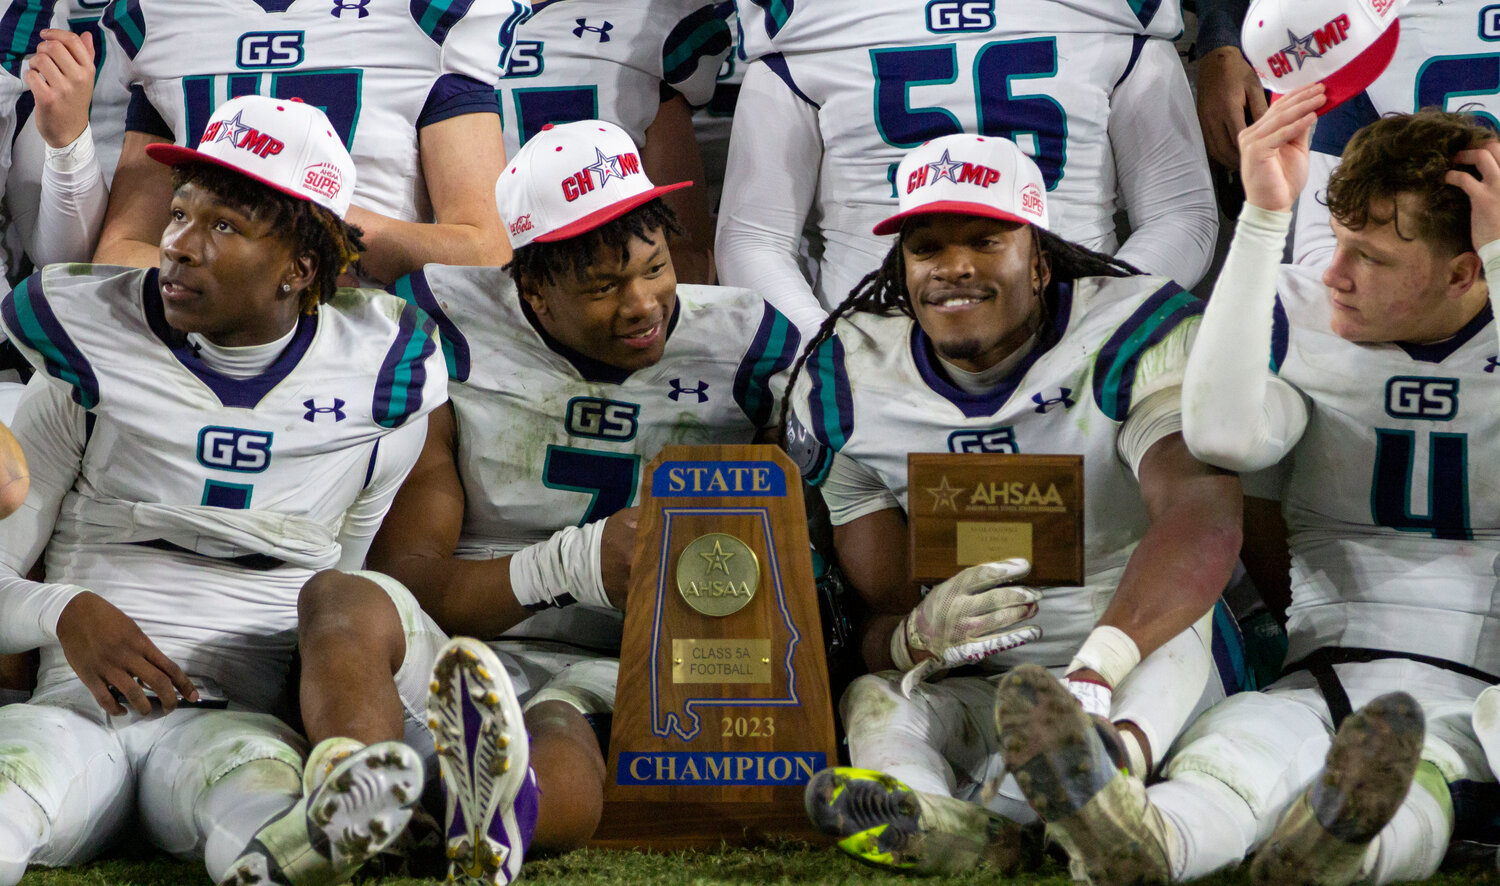 The Gulf Shores Dolphins, including Braden Jackson (1), Jamichael Garrett (7), Ronnie Royal (2) and Carter Byrd (4) crowd around the Class 5A State Championship trophy after a 21-14 win over the Ramsay Rams on Thursday, Dec. 7, at Bryant-Denny Stadium in Tuscaloosa. The Gulf Shores defense provided two turnovers on downs in the fourth quarter to seal the victory and the first Blue Map in program history.